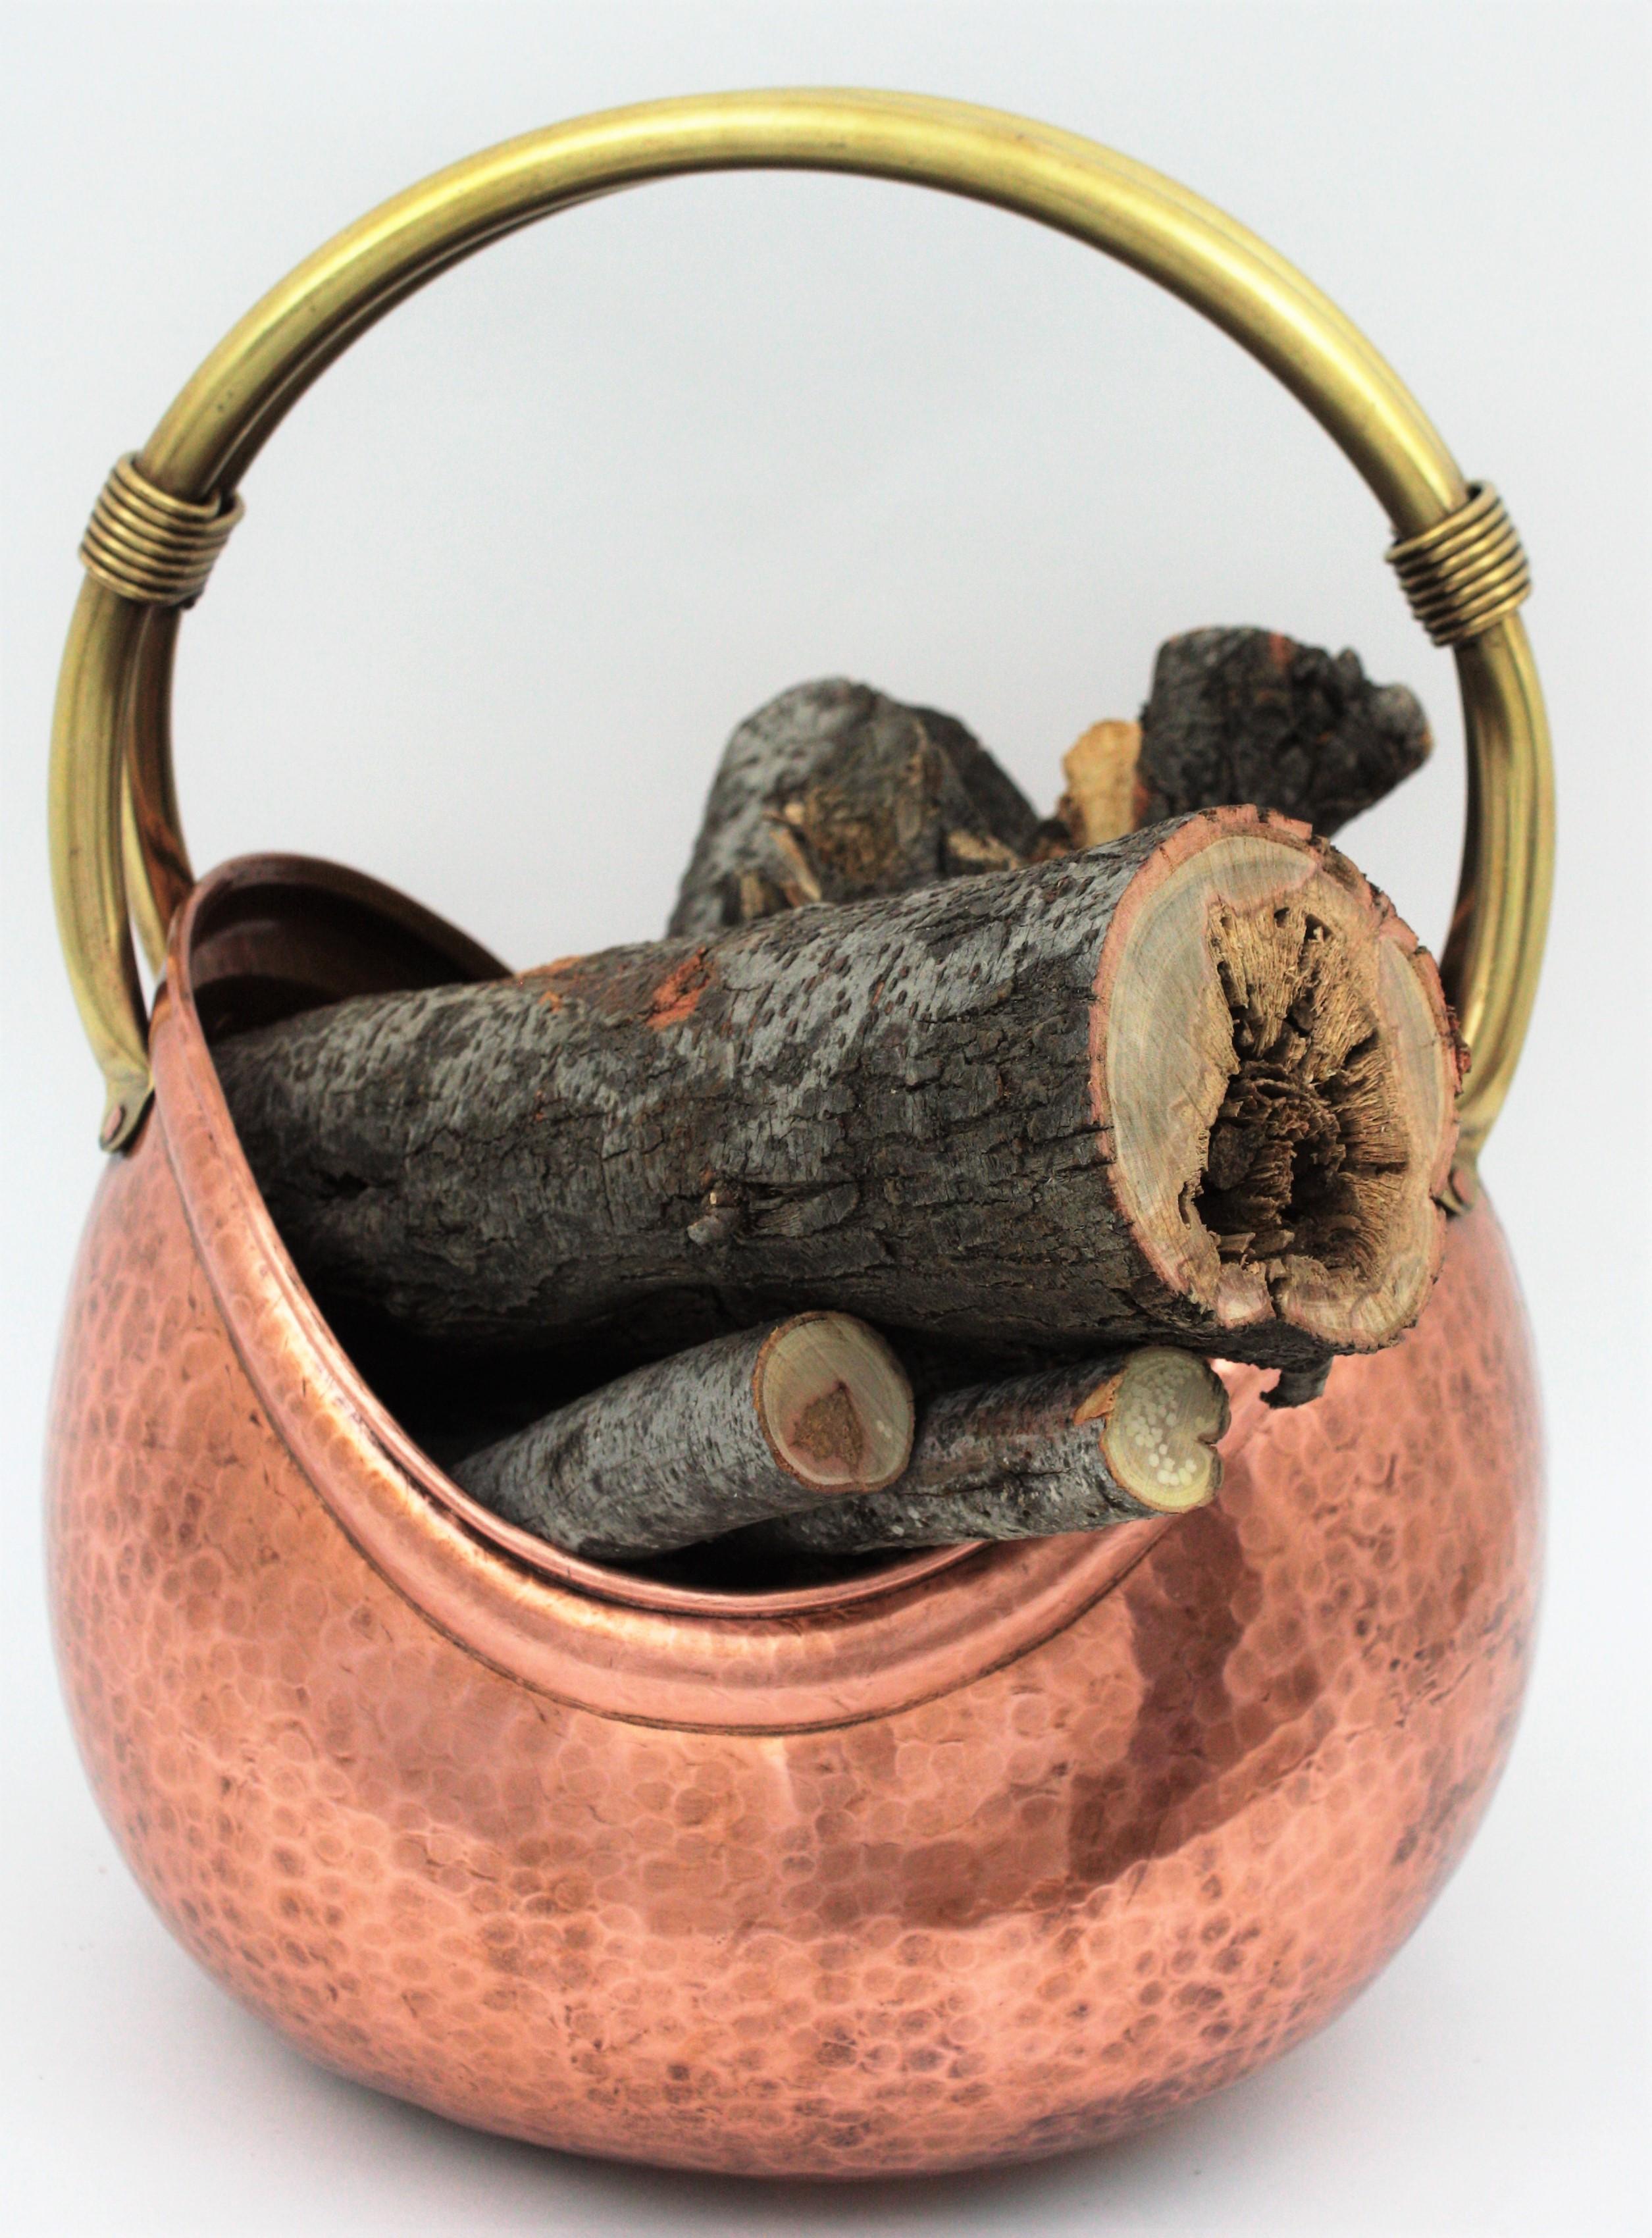 Copper and Brass Basket Magazine Stand or Log Holder with Rope Detail 6